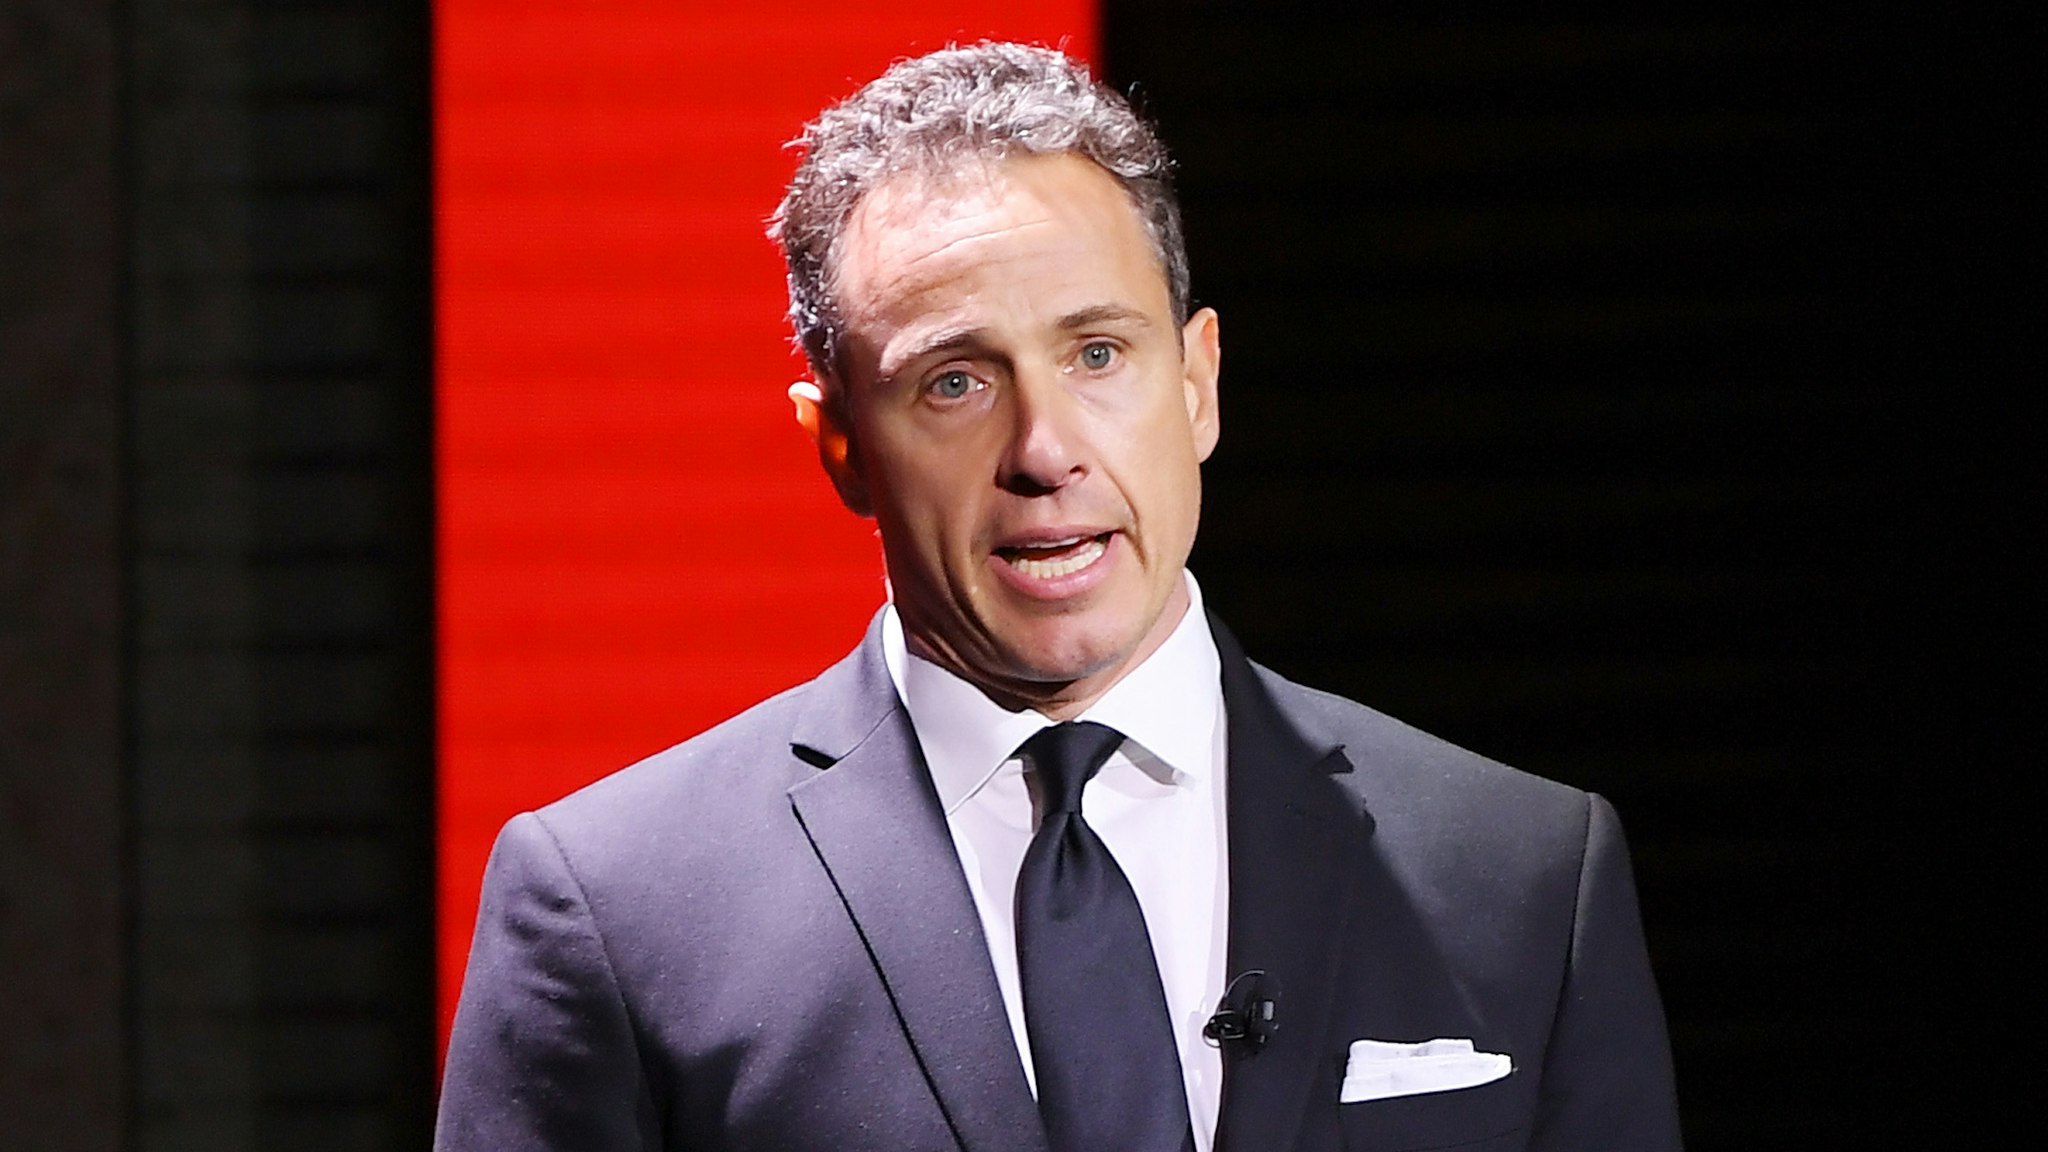 NEW YORK, NEW YORK - MAY 15: Chris Cuomo of CNN’s Cuomo Prime Time speaks onstage during the WarnerMedia Upfront 2019 show at The Theater at Madison Square Garden on May 15, 2019 in New York City.